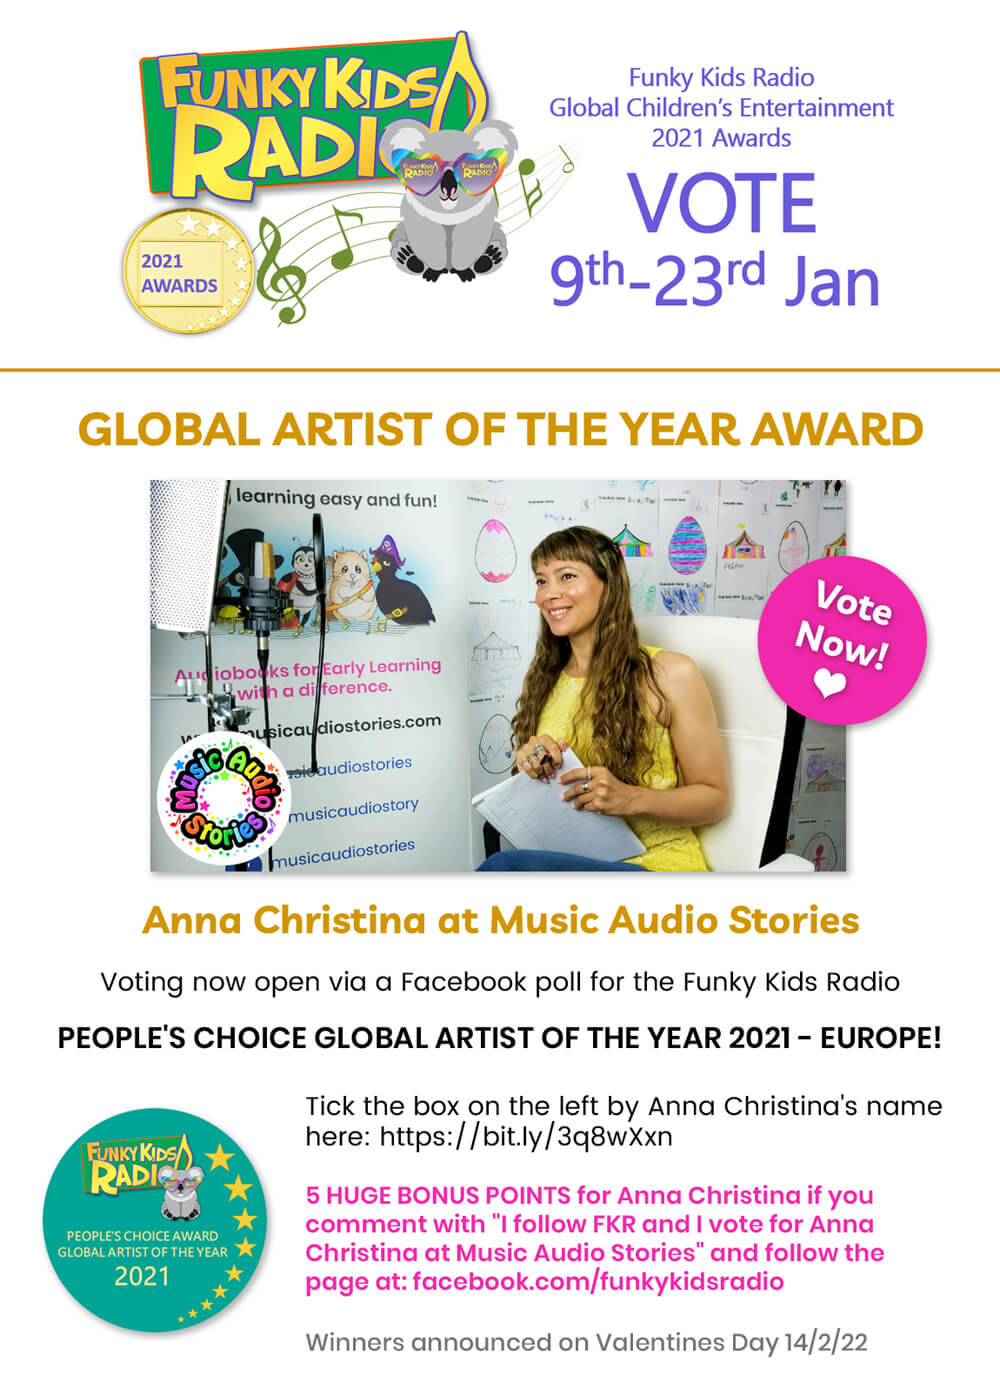 Anna-Christina at Music Audio Stories nominated for the Funky Kids Radio Global Artist of the Year Award